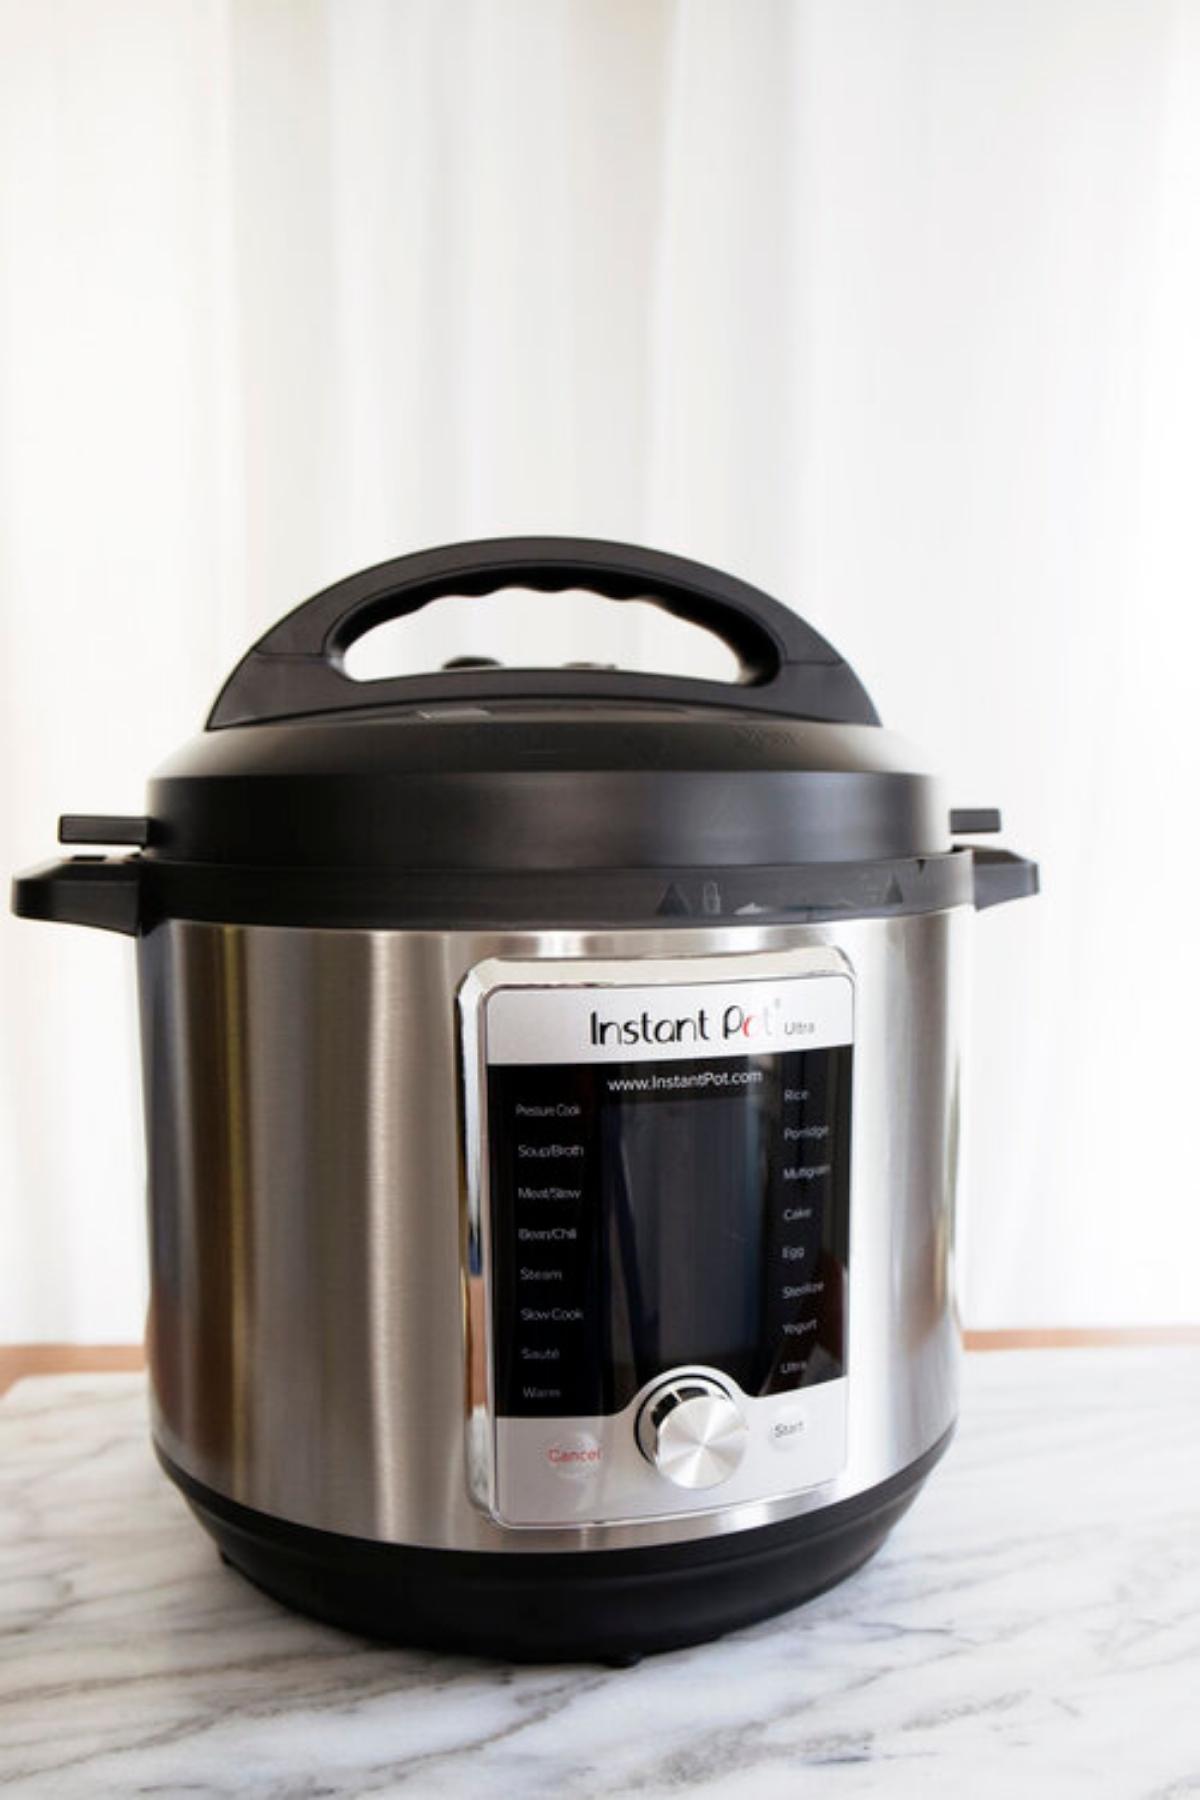 Instant pot pressure cooker sitting on a counter